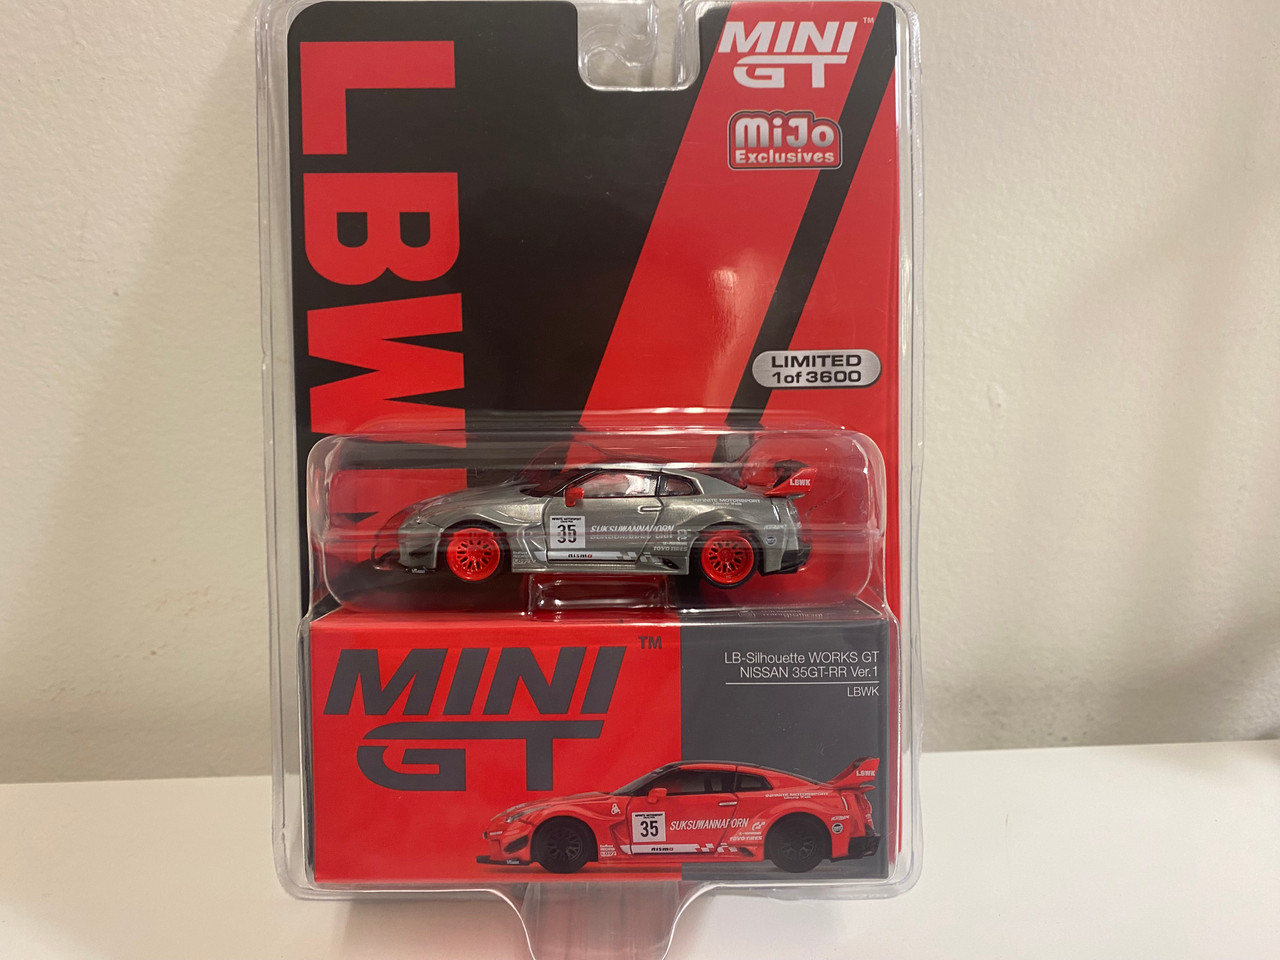 CHASE CAR 1/64 Mini GT Nissan 35GT-RR Ver.1 LB-Silhouette Works GT LBWK RHD  (Right Hand Drive) #35 Chrome Silver with Black Top and Graphics Limited ...